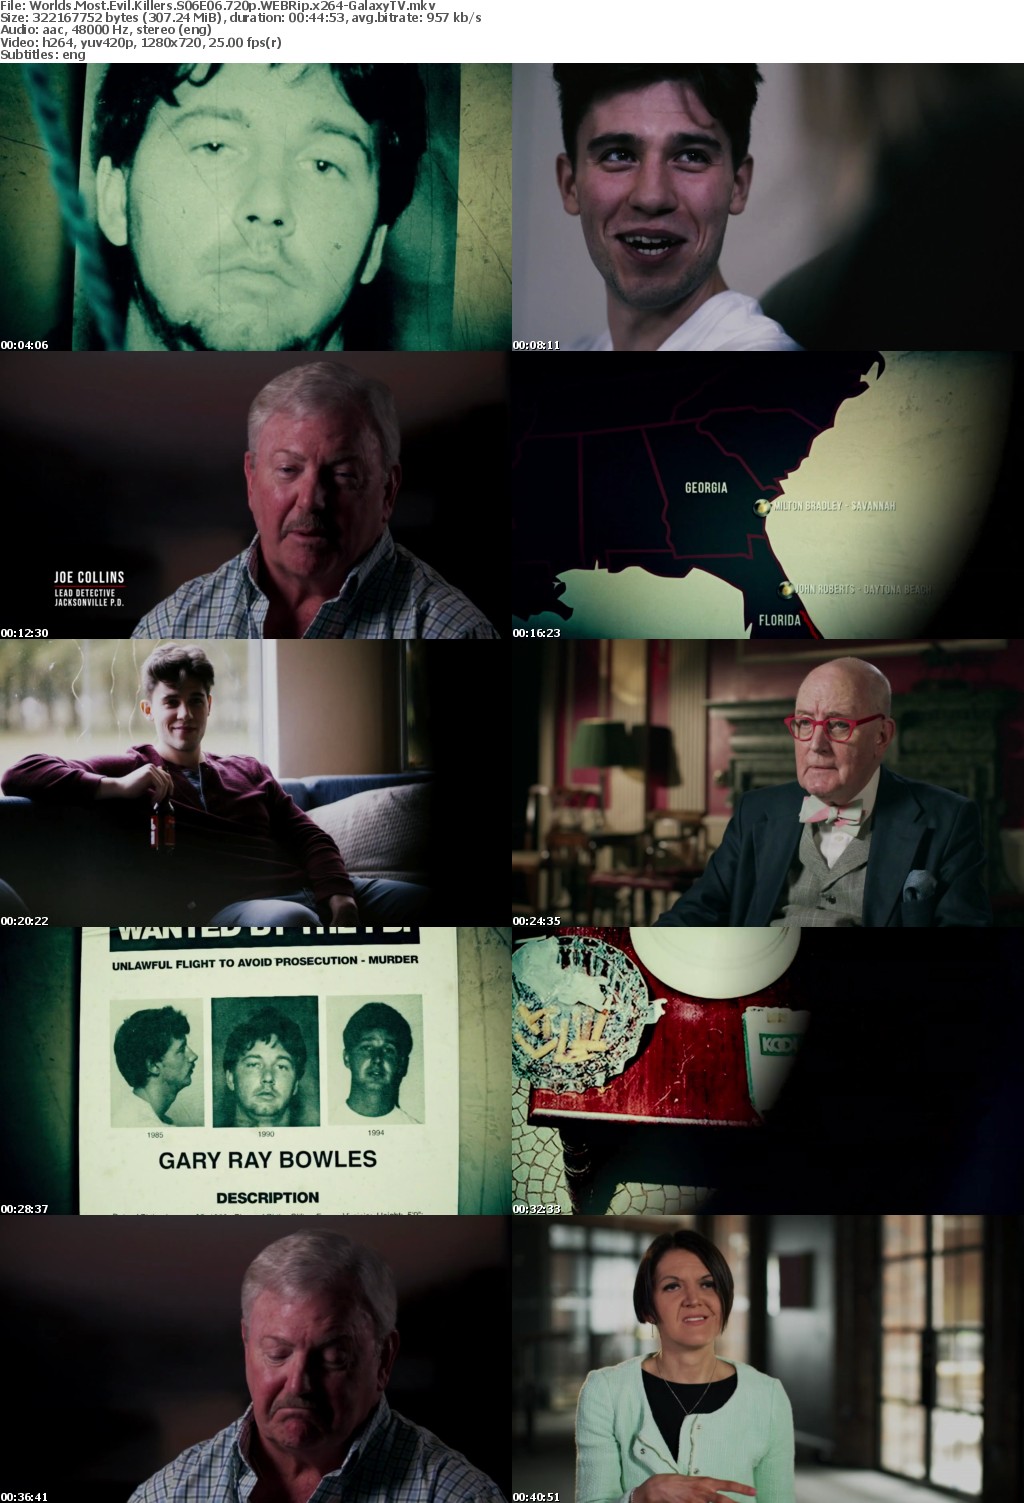 Worlds Most Evil Killers S06 COMPLETE 720p WEBRip x264-GalaxyTV